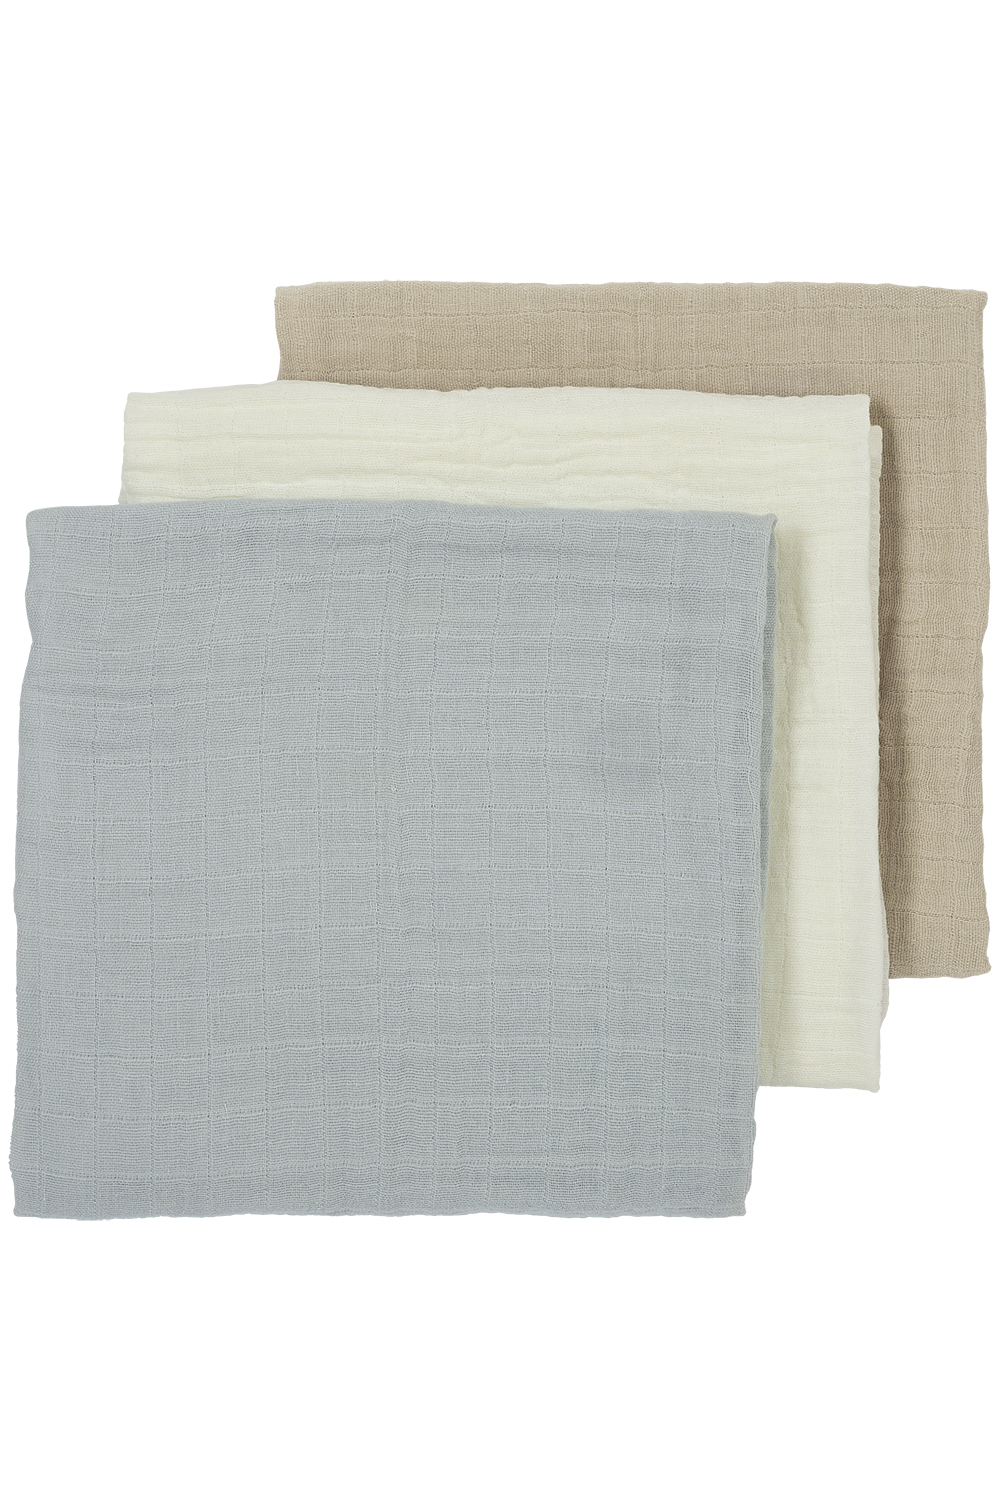 Pre-washed muslin squares 3-pack Uni - offwhite/light grey/sand - 70x70cm